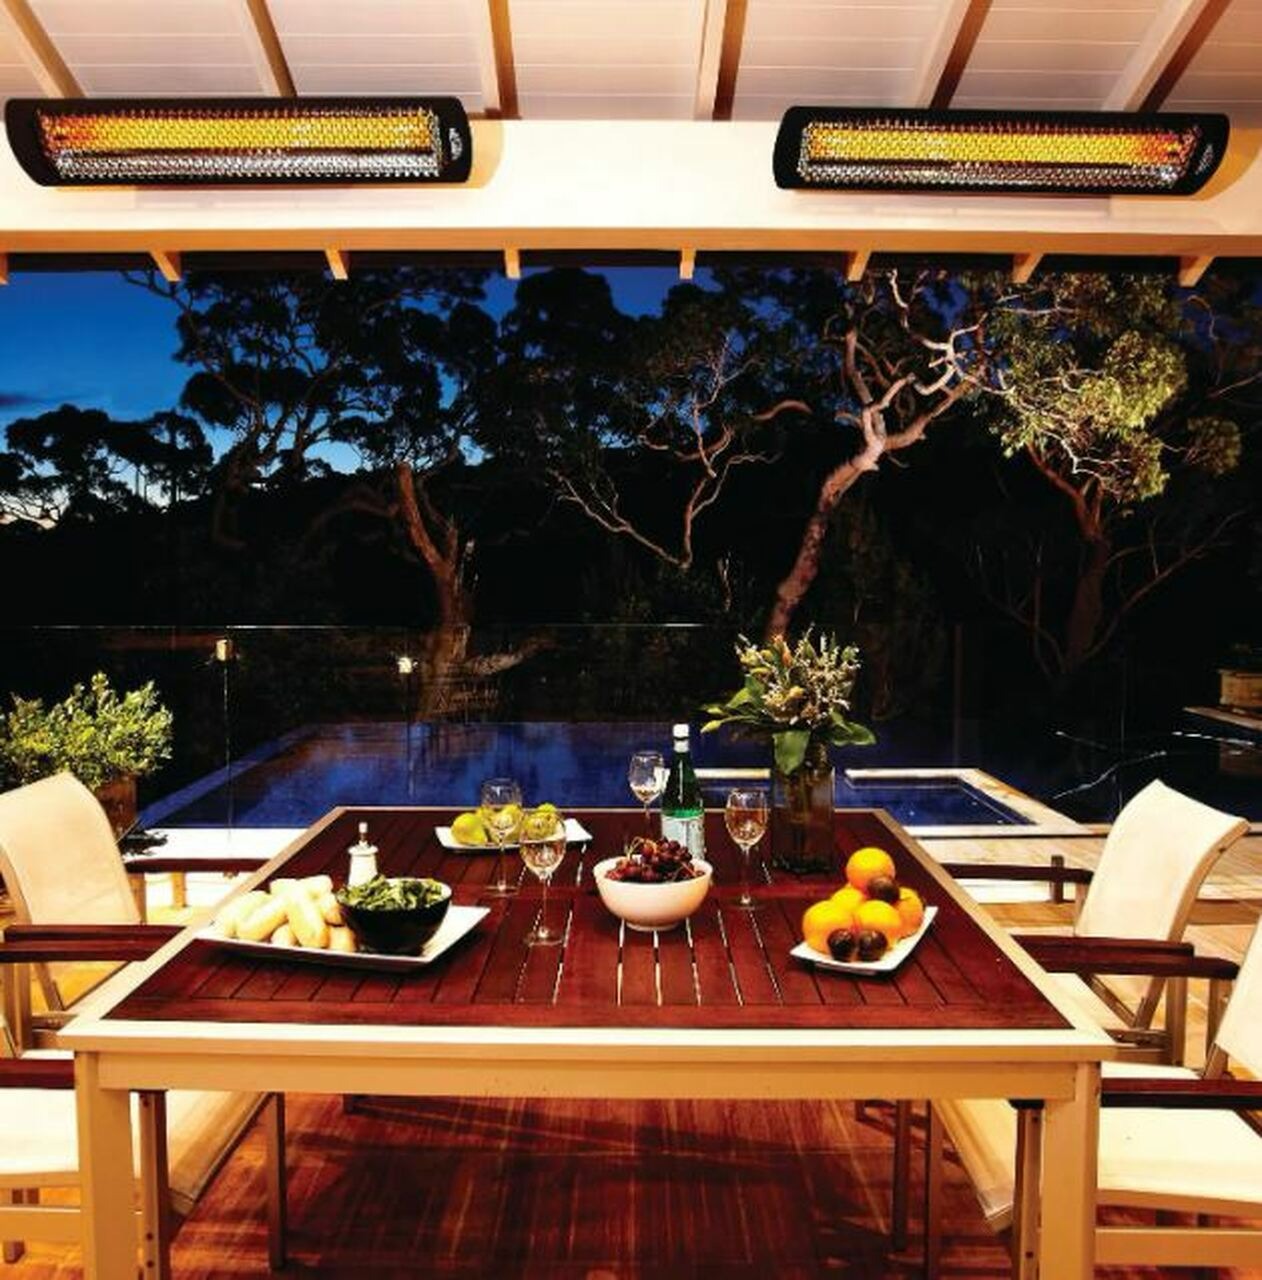 Modern outdoor patio heaters ceiling-mounted in a backyard patio gazebo with dinner setting